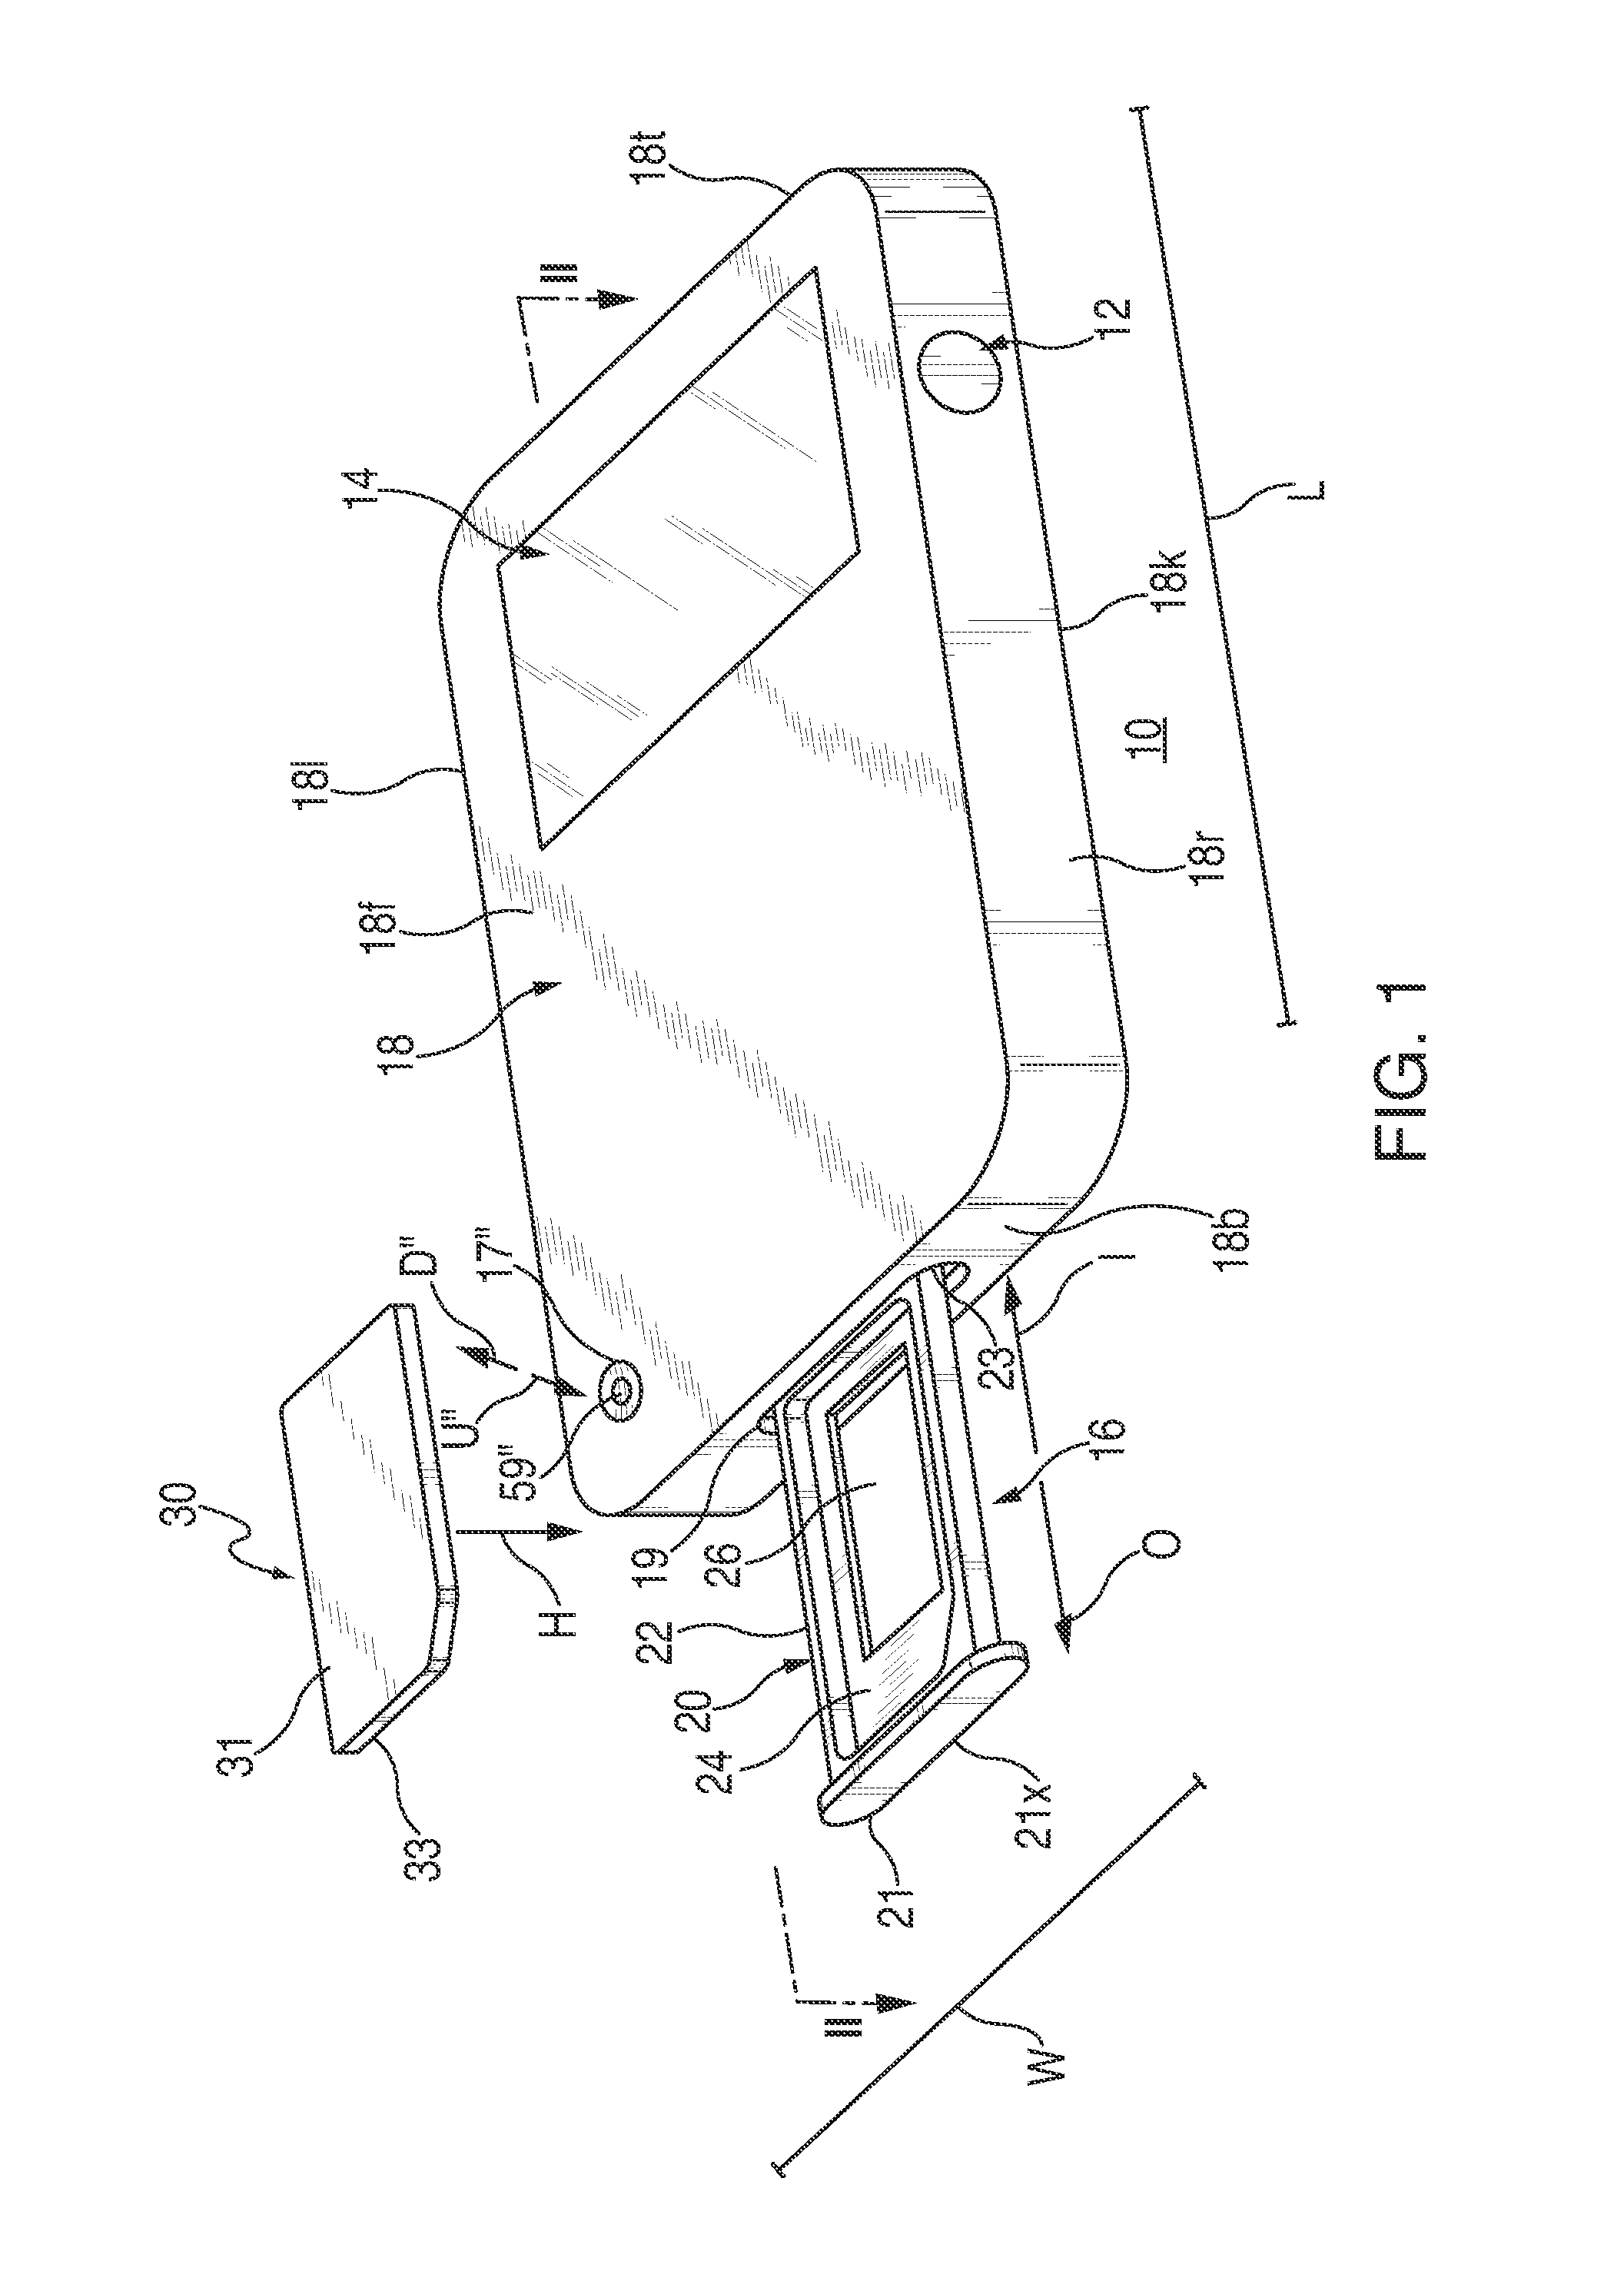 Systems and methods for ejecting removable modules from electronic devices